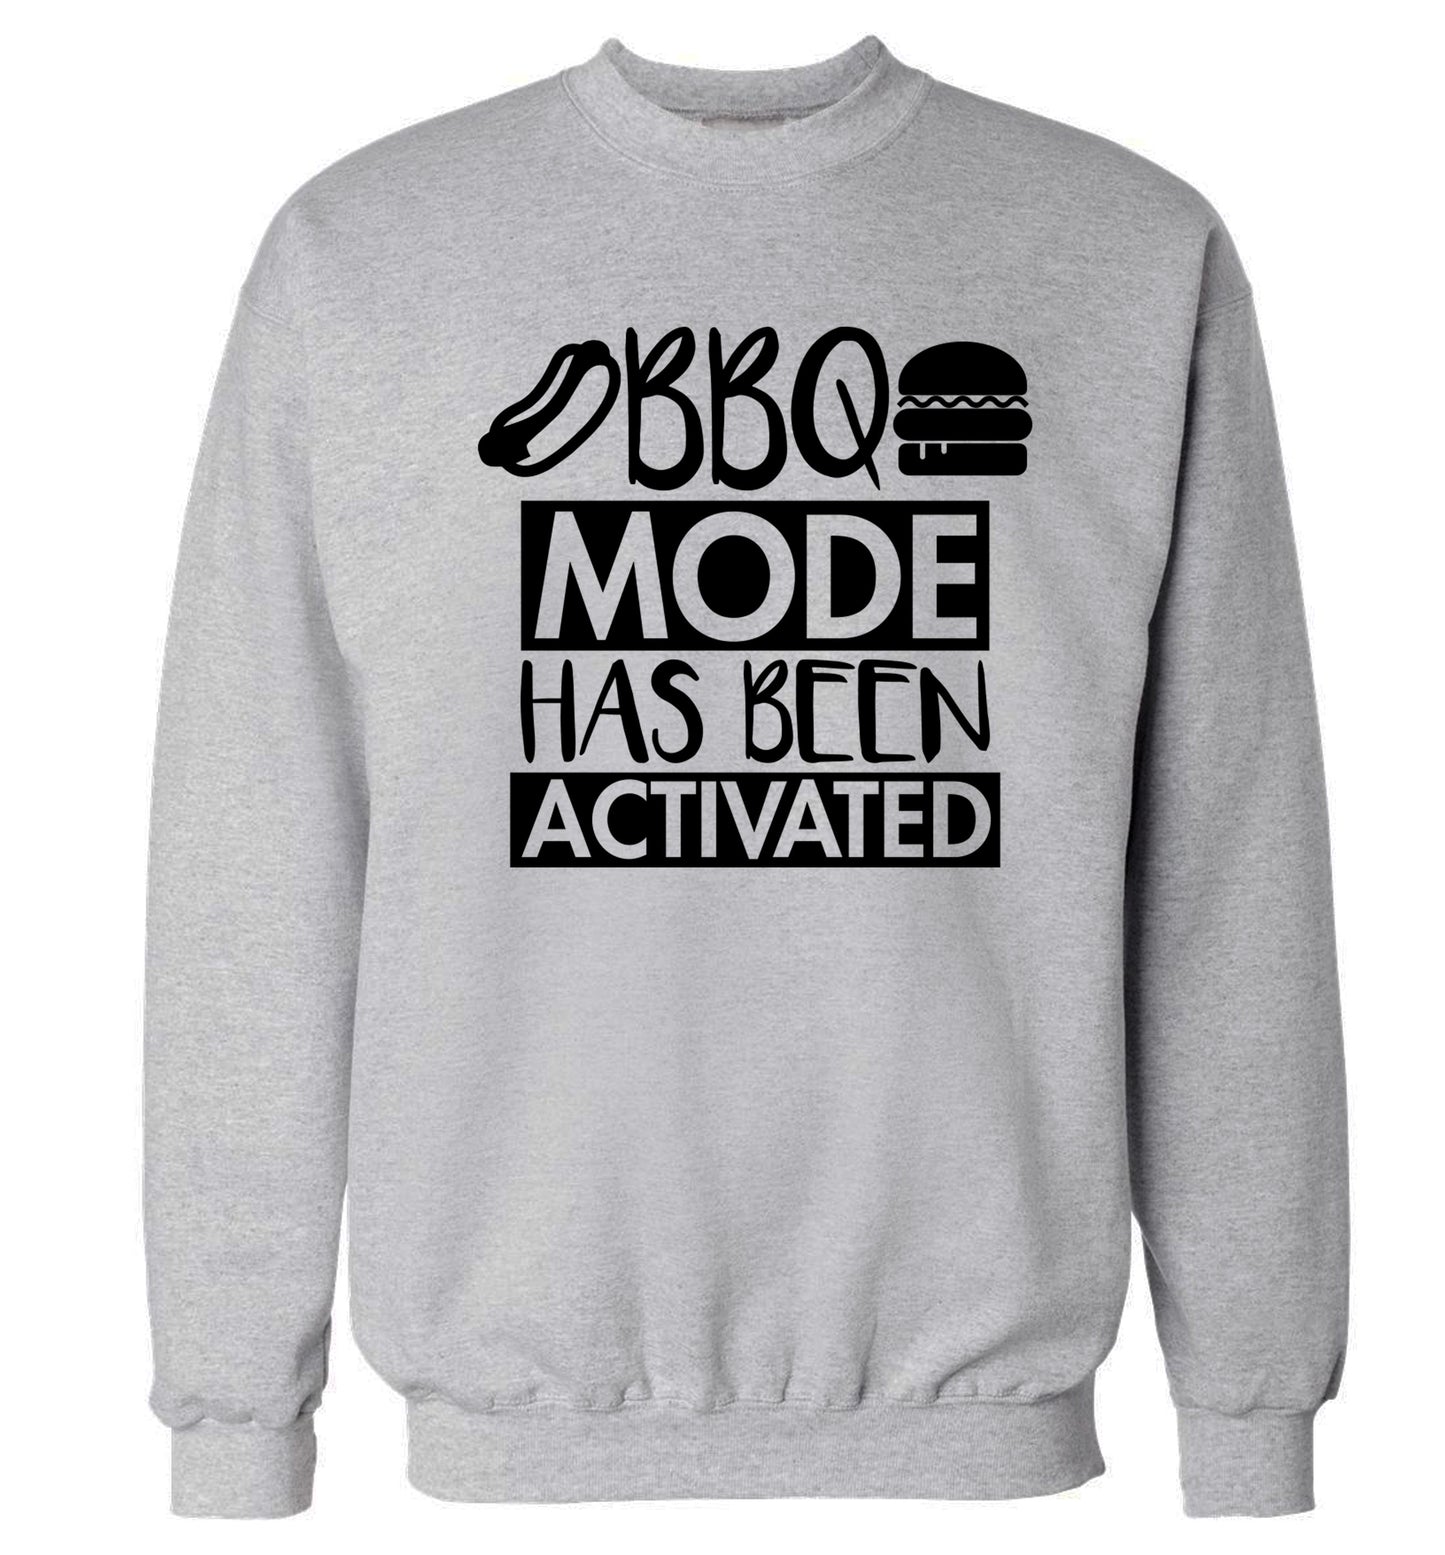 Bbq mode has been activated Adult's unisex grey Sweater 2XL